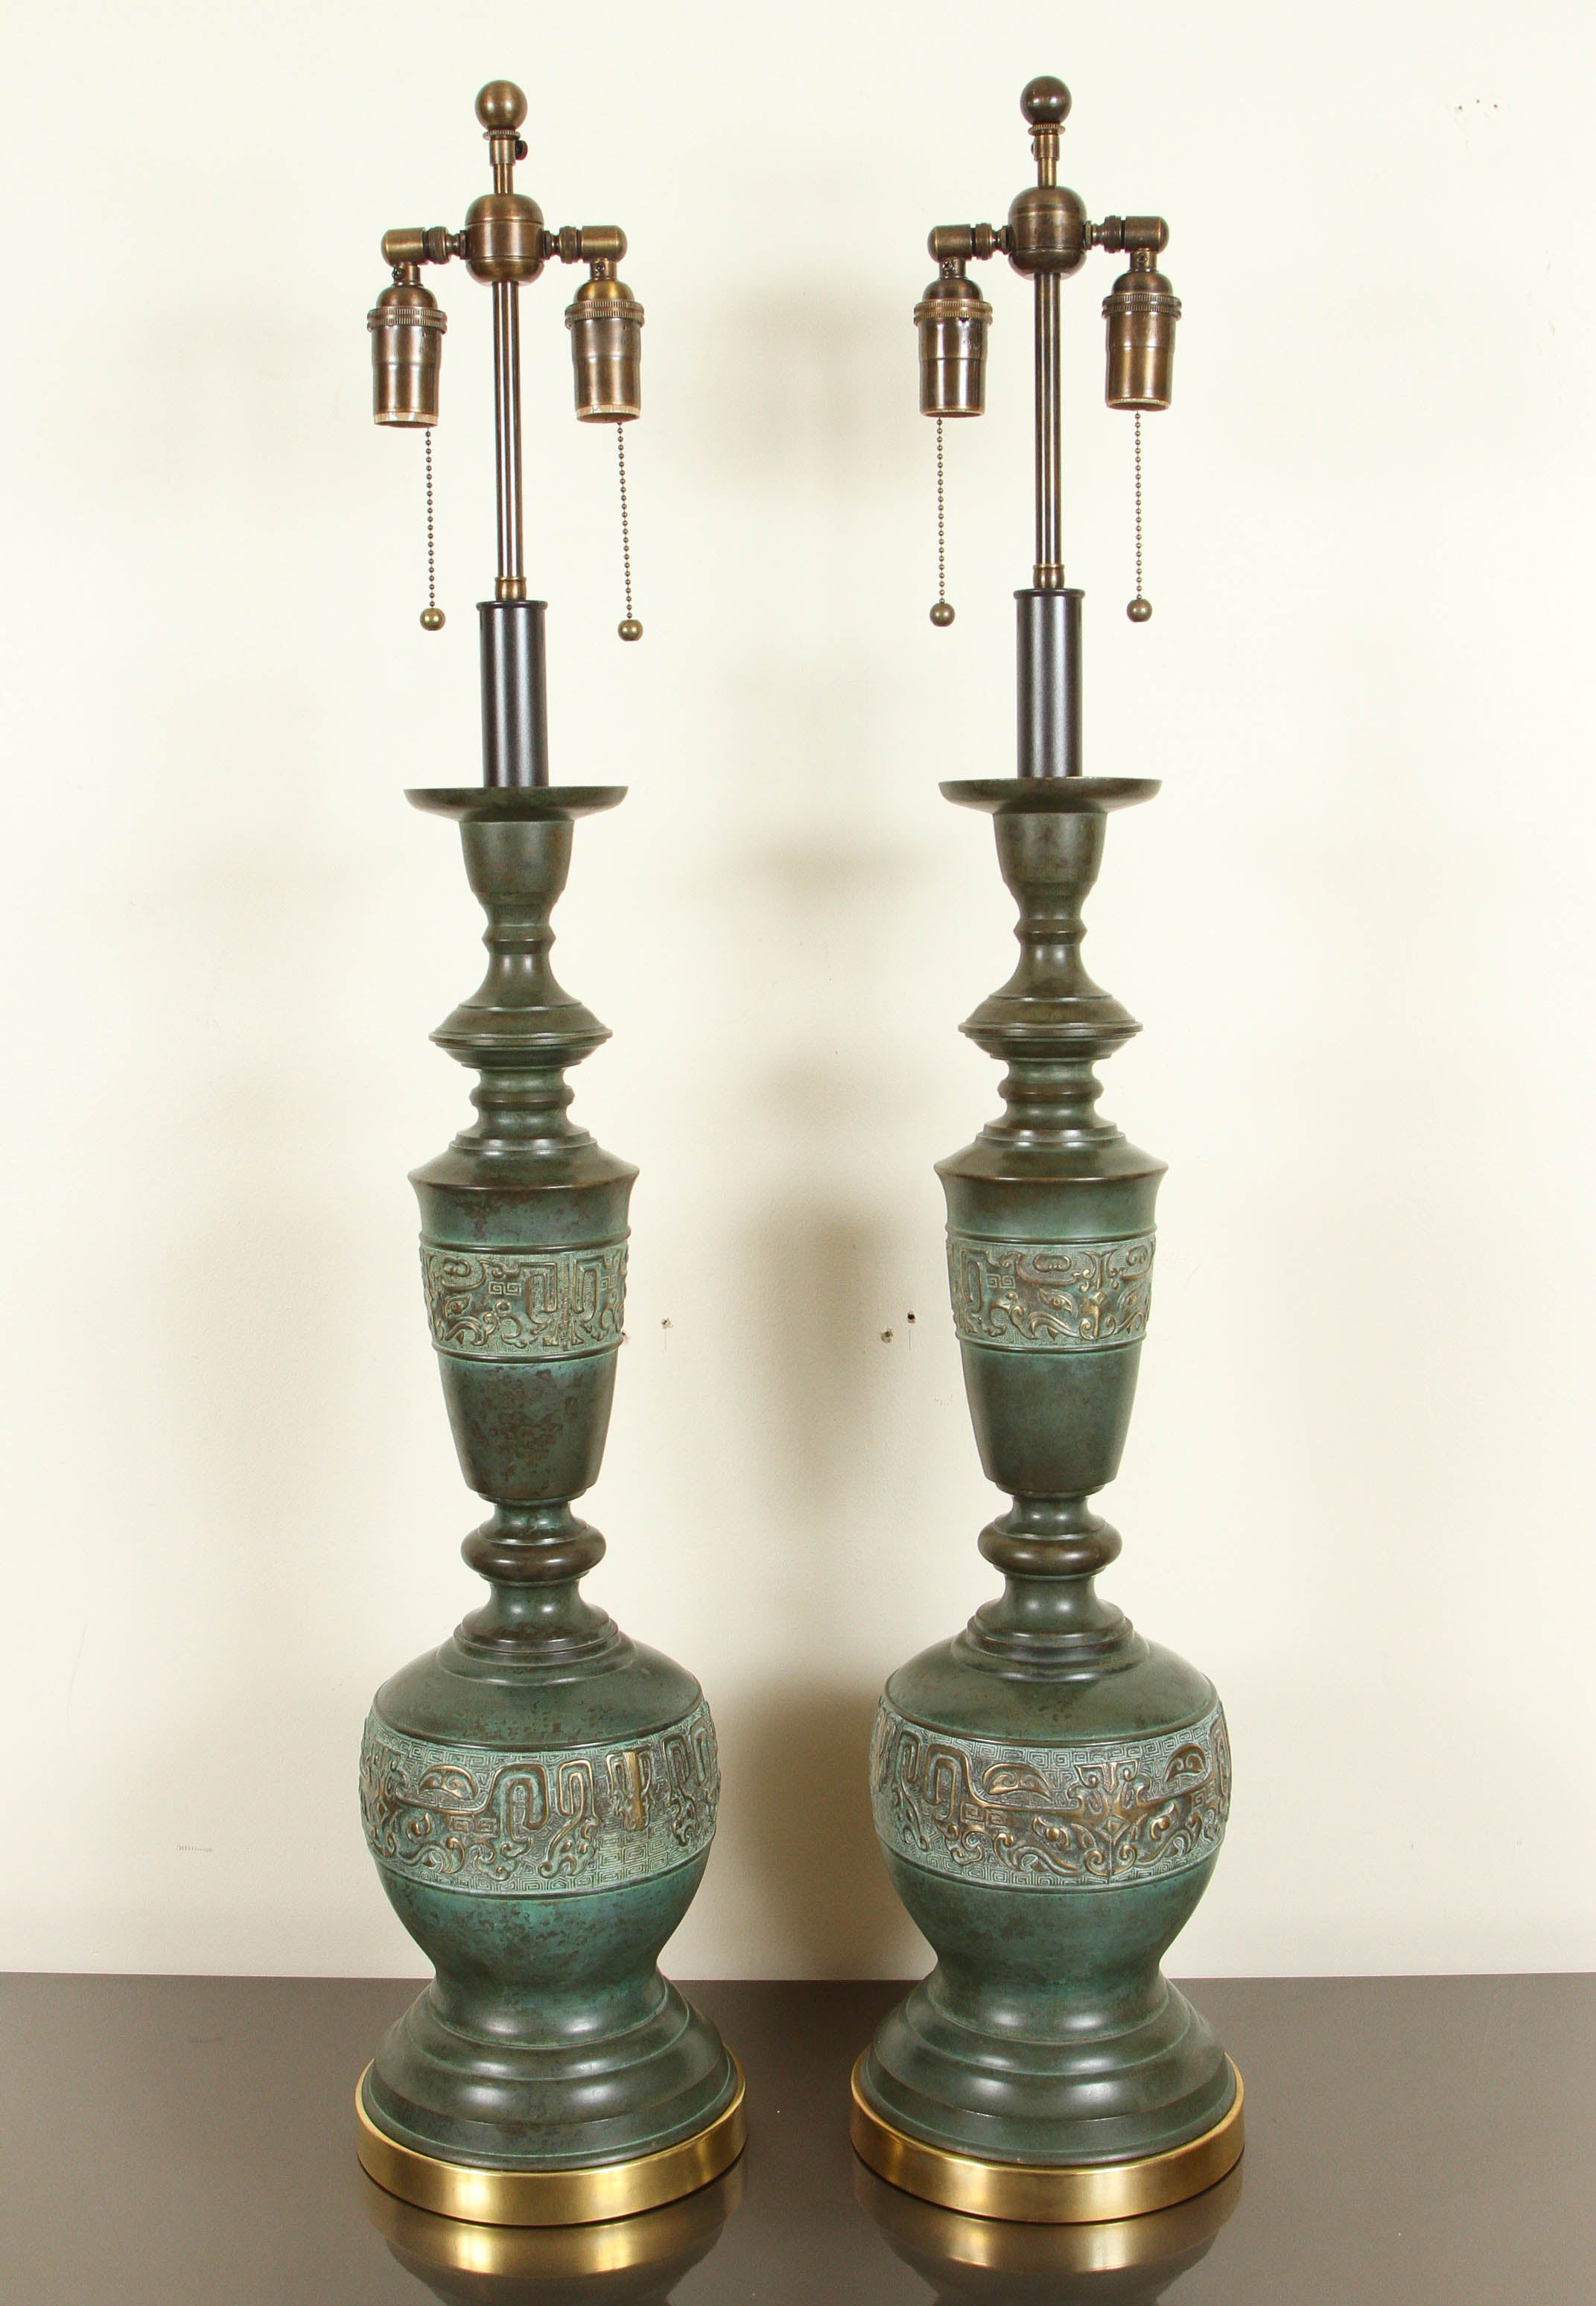 Large pair of metal table lamps with a verdigris bronze finish by Marbro.   
The  large lamp bodies have a band with a design detail highlighted  in gold and they sit up on brass bases.  The lamps have been newly rewired with  bronze finished